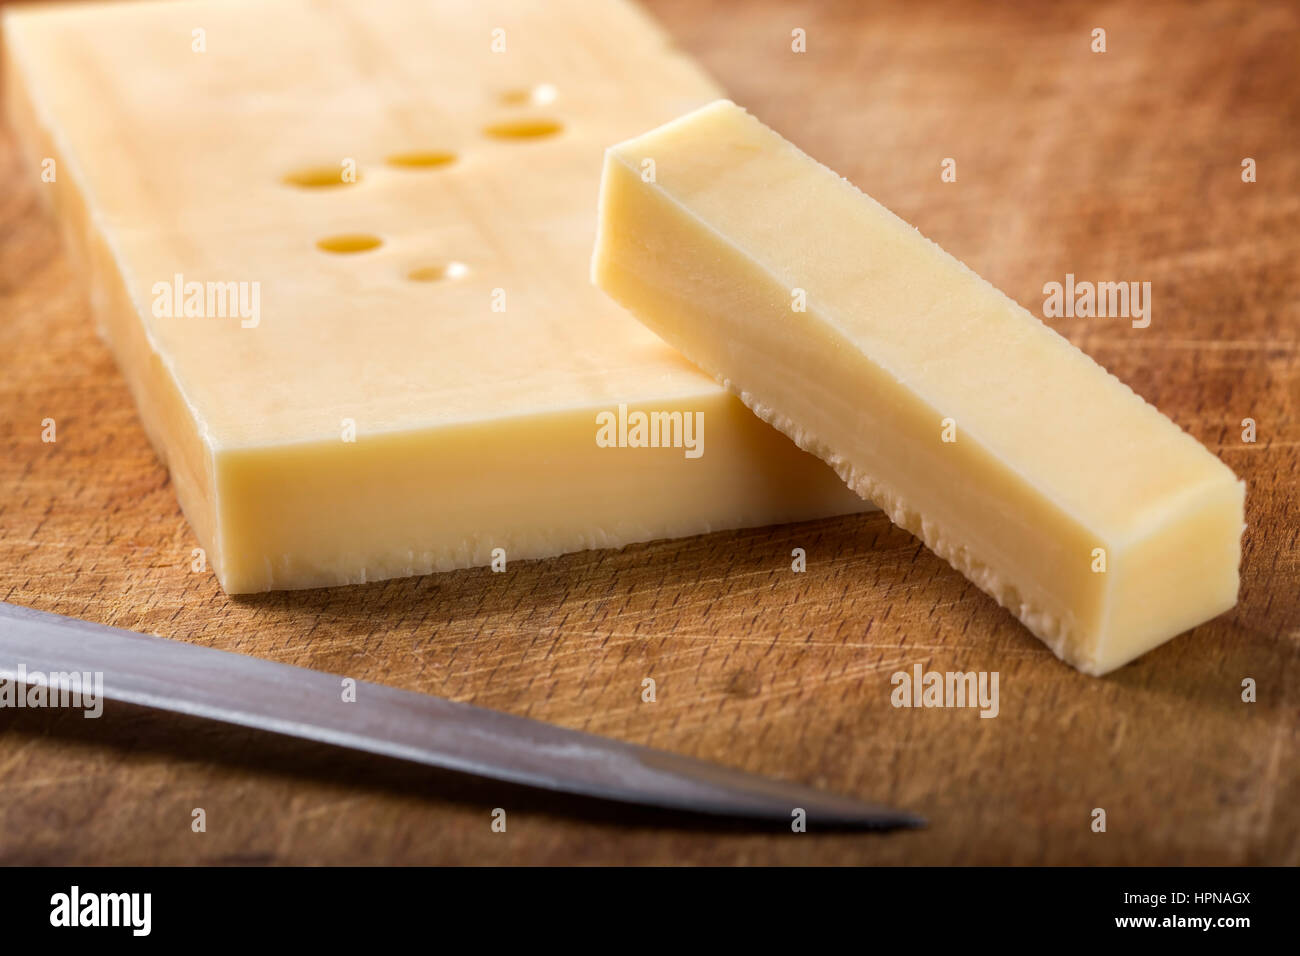 Emmental cheese with knife on wooden cutting board Stock Photo